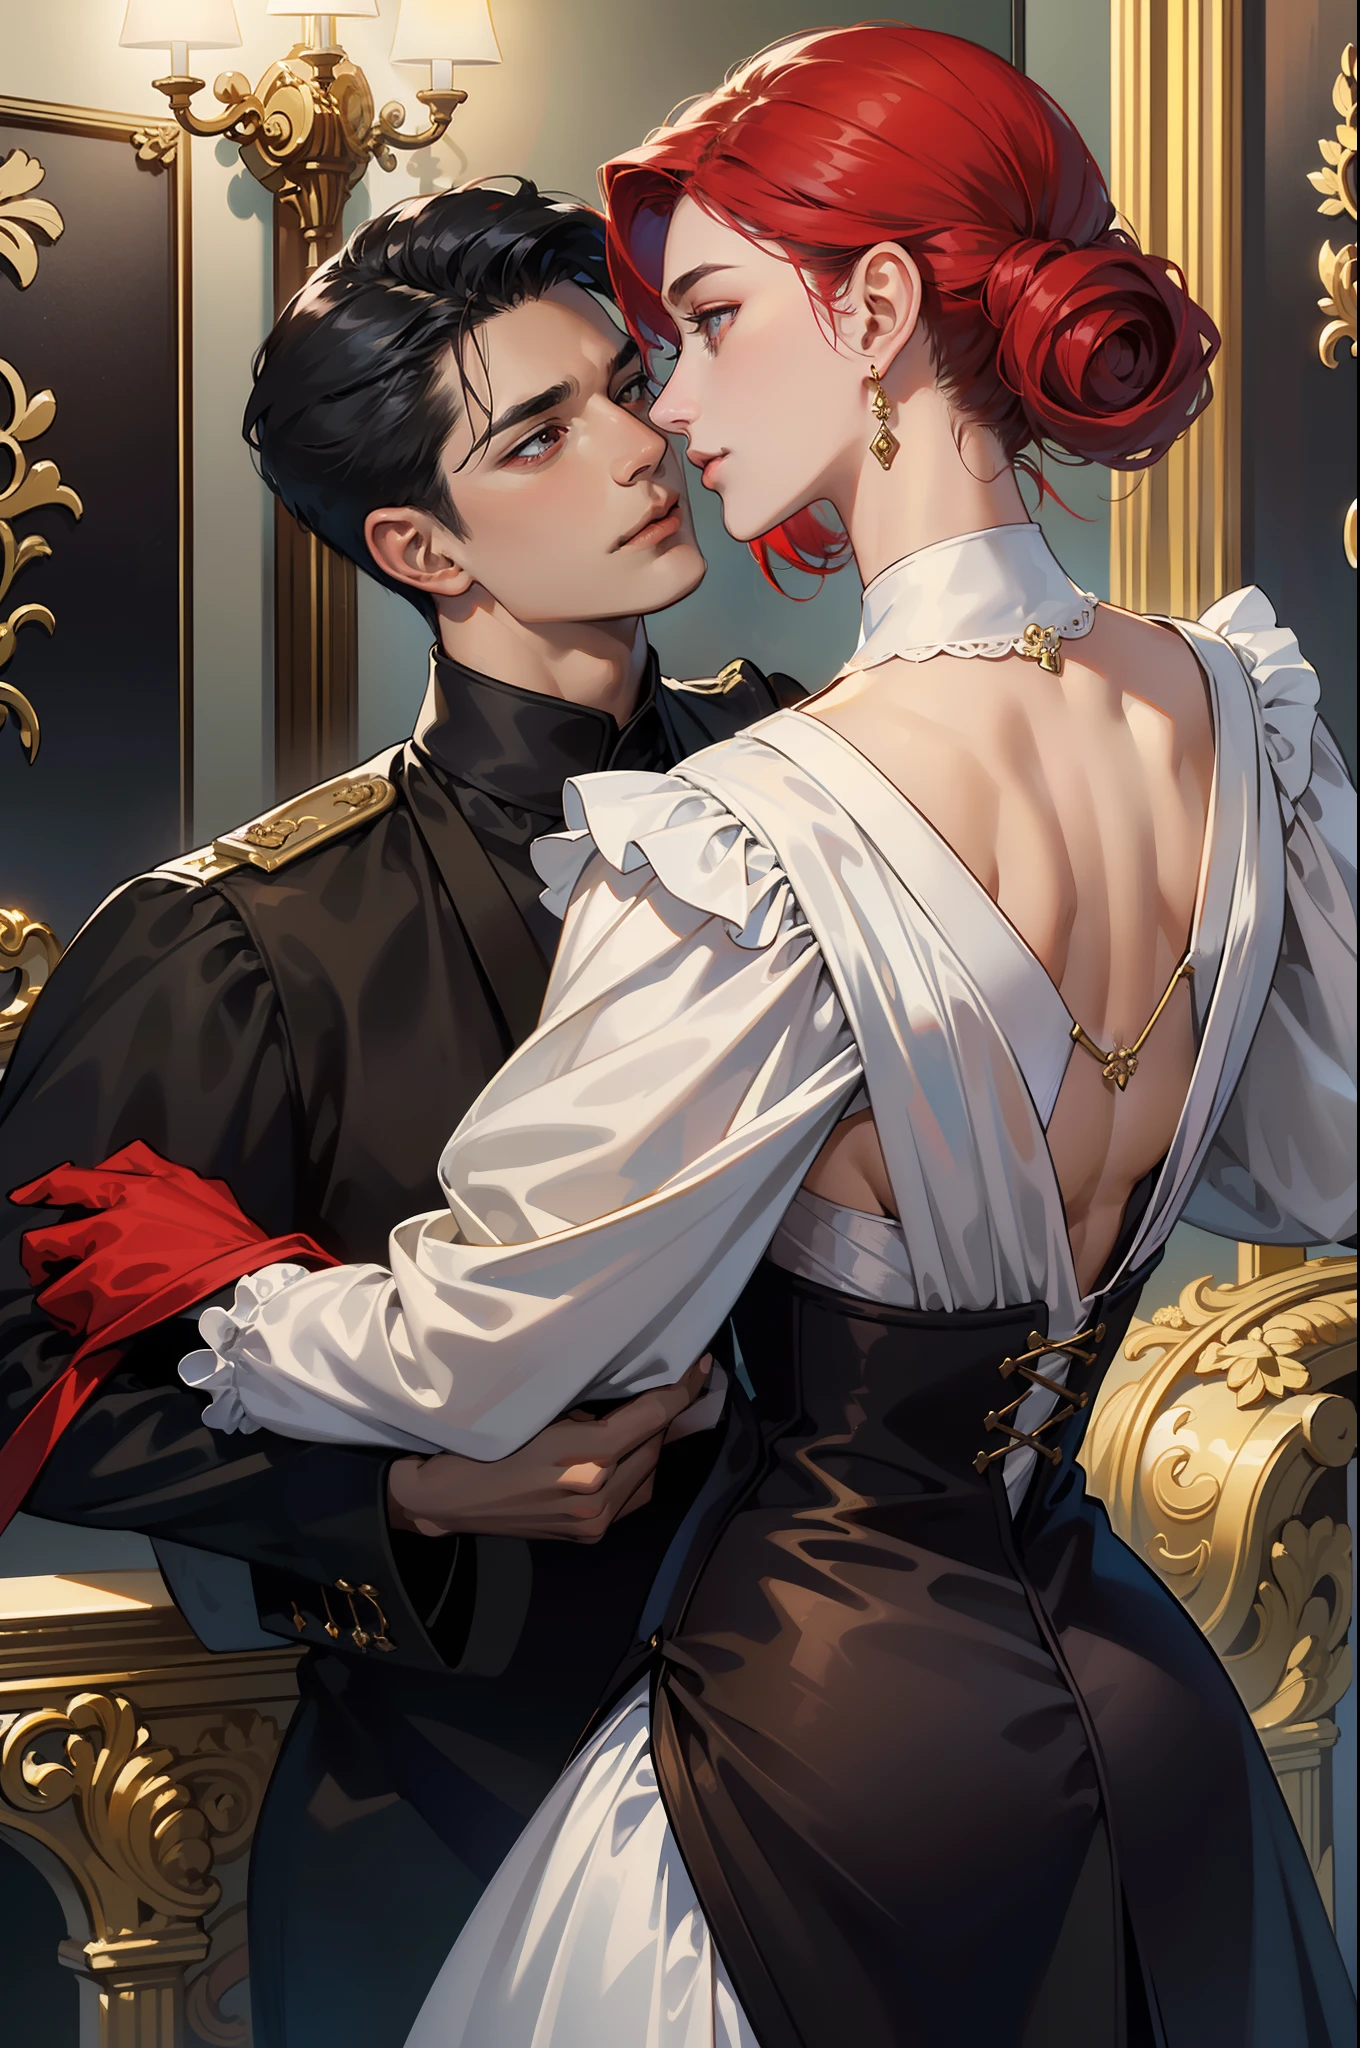 ((Masterpieces)), Best Quality, outstanding illustration, (((A couple seeing each other))), soft focus, (((1 boy with short black hair))) (((TALL AND MUSCULAR))) (((blue eyes))) (((dark wizard clothing))), (((1 girl from (((Red hair))) long curly))) (((gold eyes))) (((elaborate and beautiful WHITE wedding dress))), victorian clothing, Victorian and magical romanticism, opulent and exquisite atmosphere, Soft light and warm lighting.